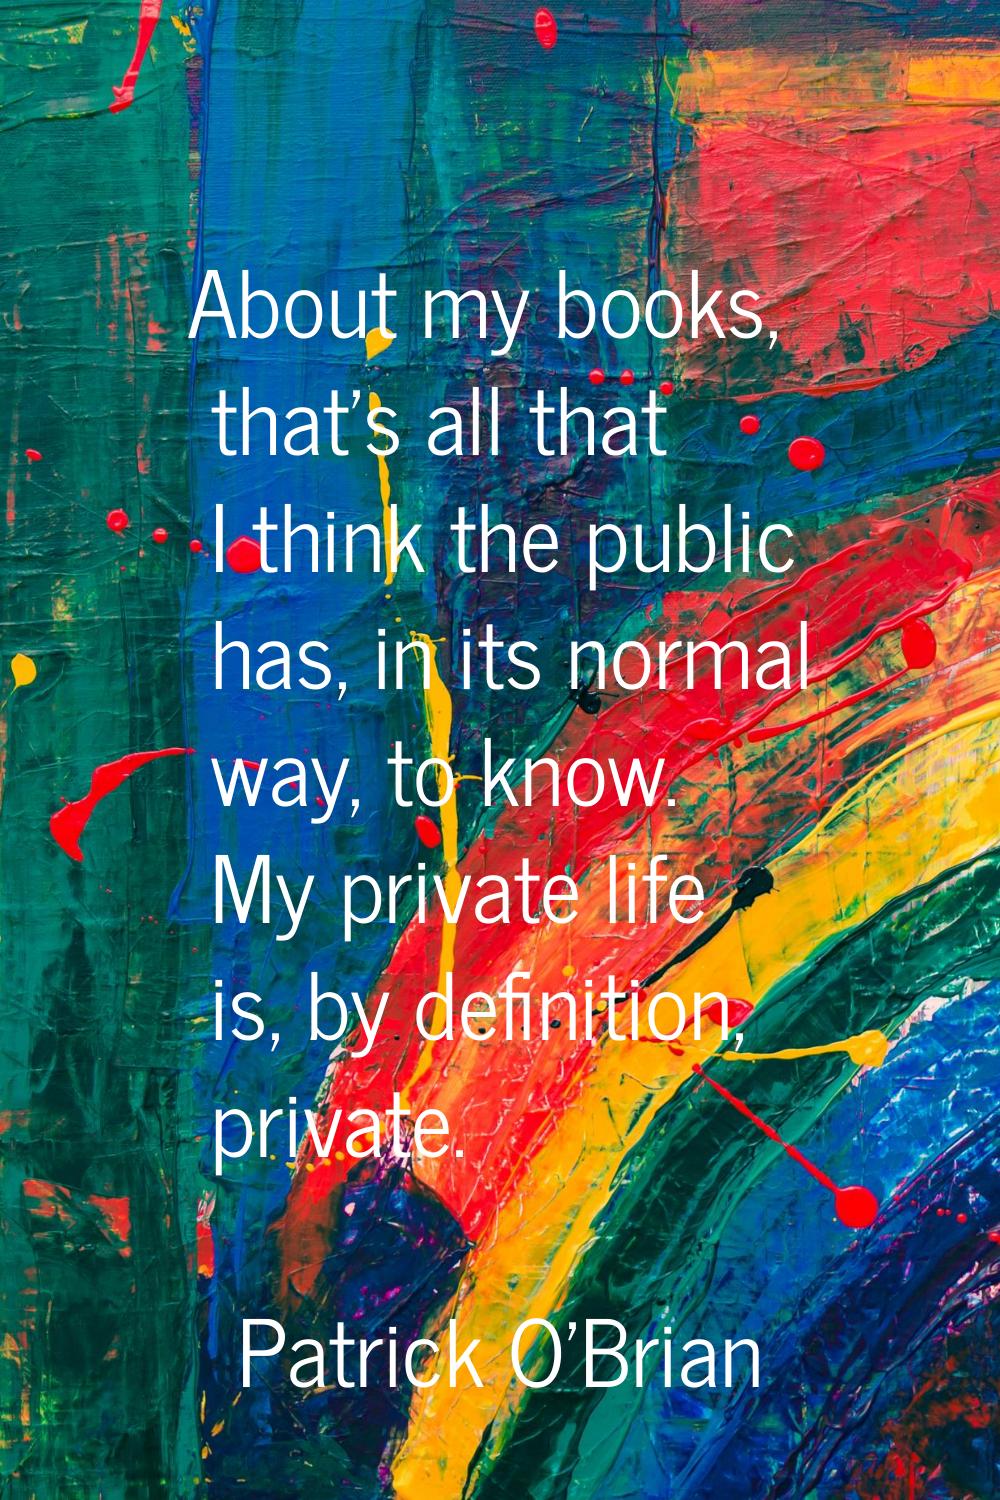 About my books, that's all that I think the public has, in its normal way, to know. My private life